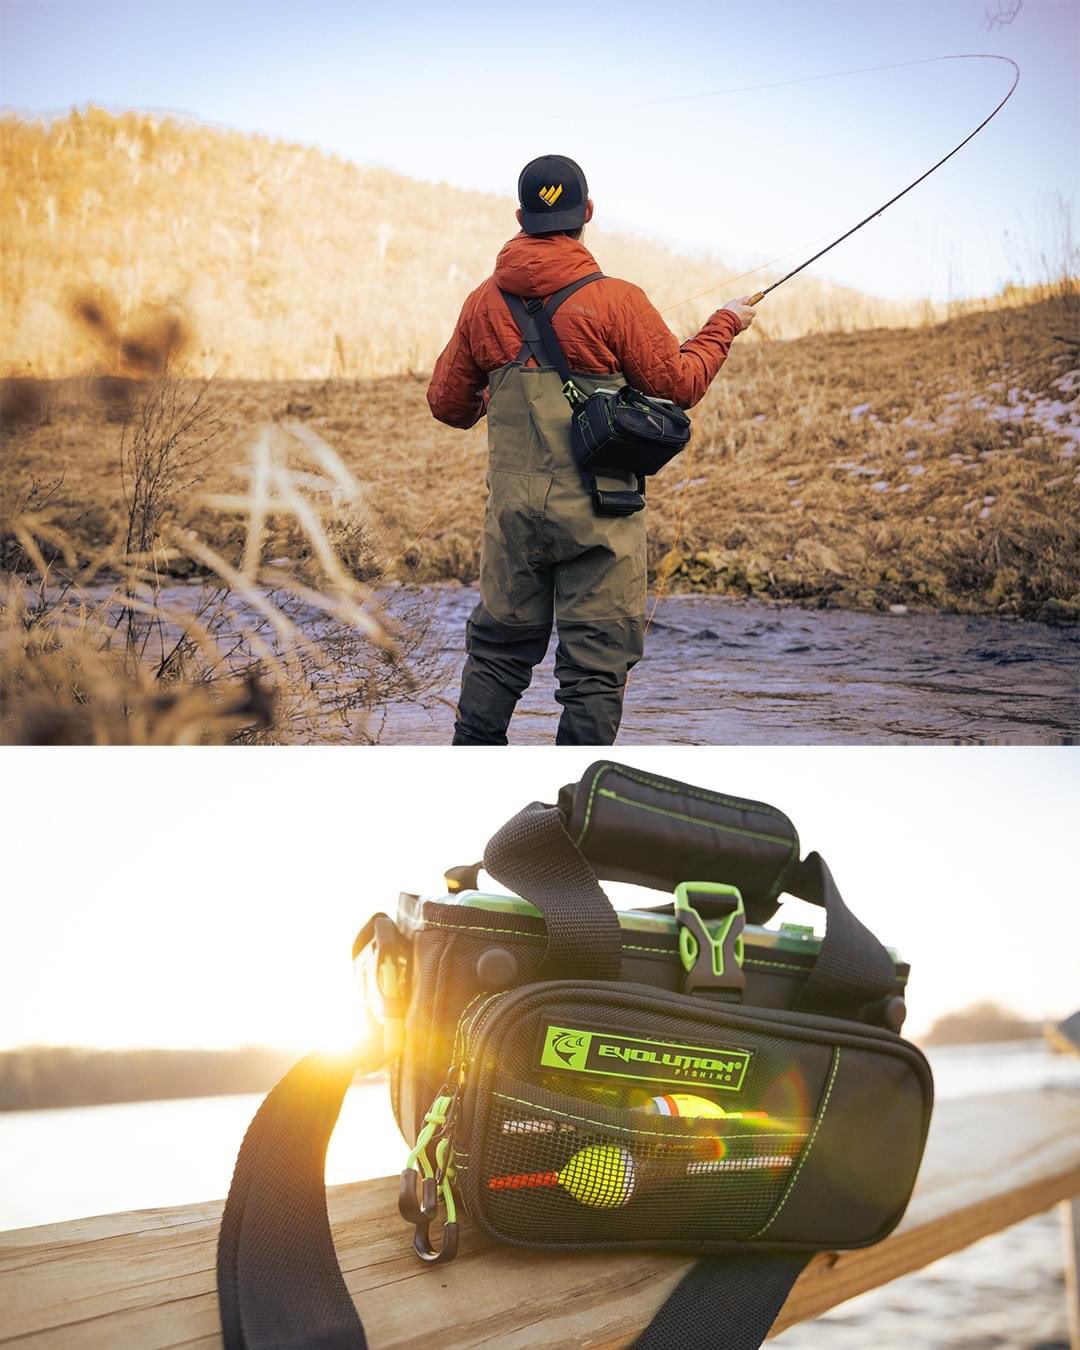 Evolution Outdoor, LLC on X: Drift 3500 Tackle Bag - The Go-To for small  water fishing #evolutionfishing #fishing #fishinggear #fishinglife  #bassfishing #salmonfishing #troutfishing #flyfishing #kayakfishing  #fishingaddict #fishon #texasfishing